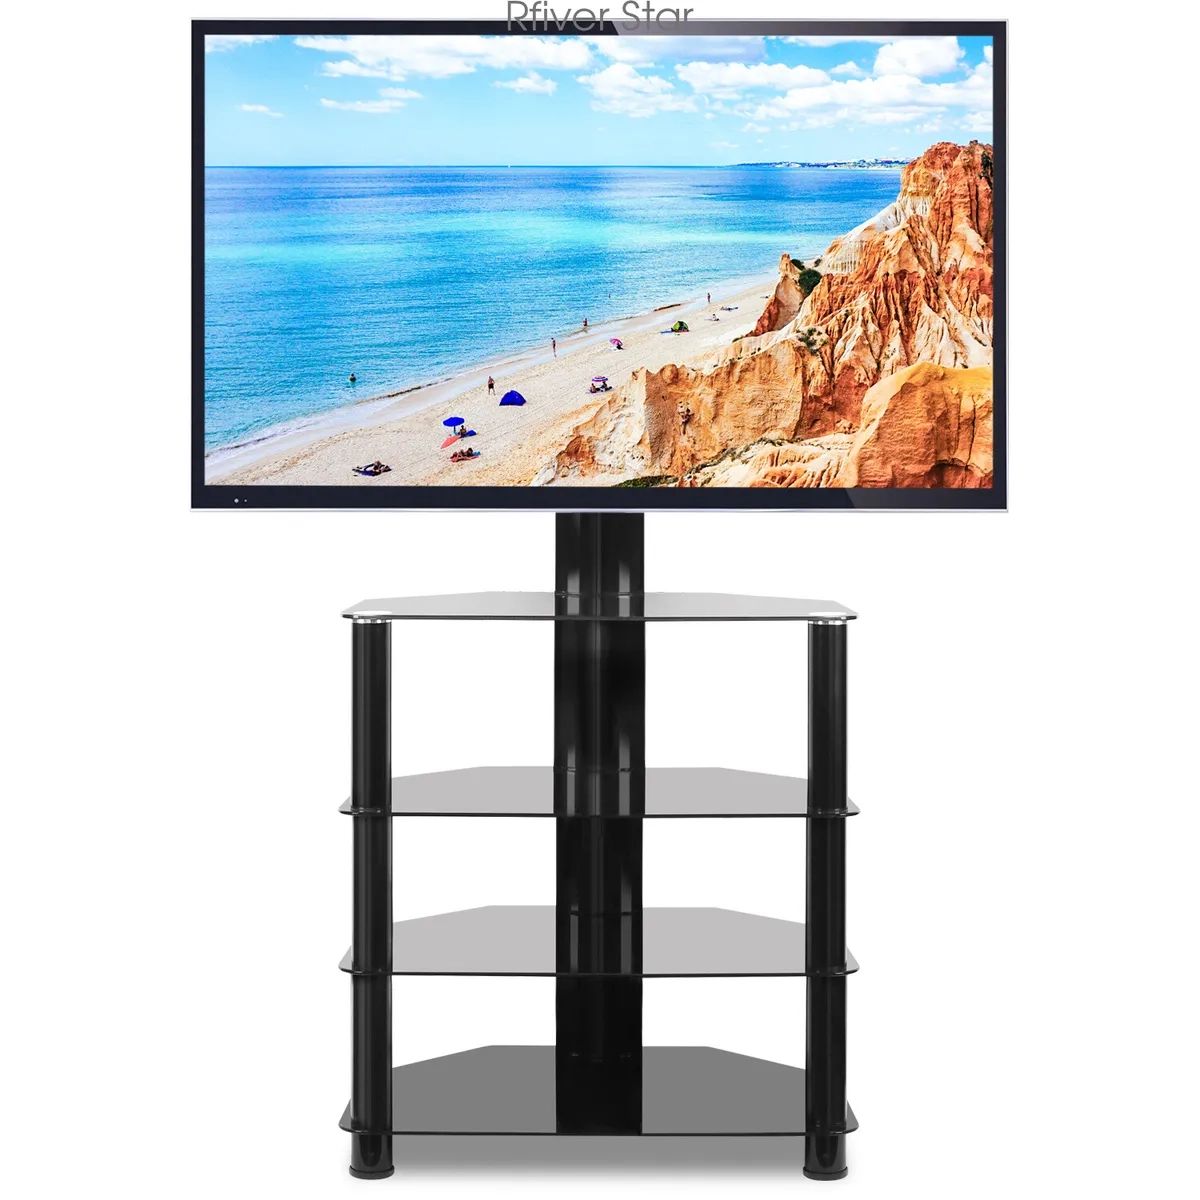 Universal Floor Tv Stand With Swivel Mount And 4 Shelves For 32" 55" Tvs |  Ebay Throughout Universal Floor Tv Stands (Photo 2 of 15)